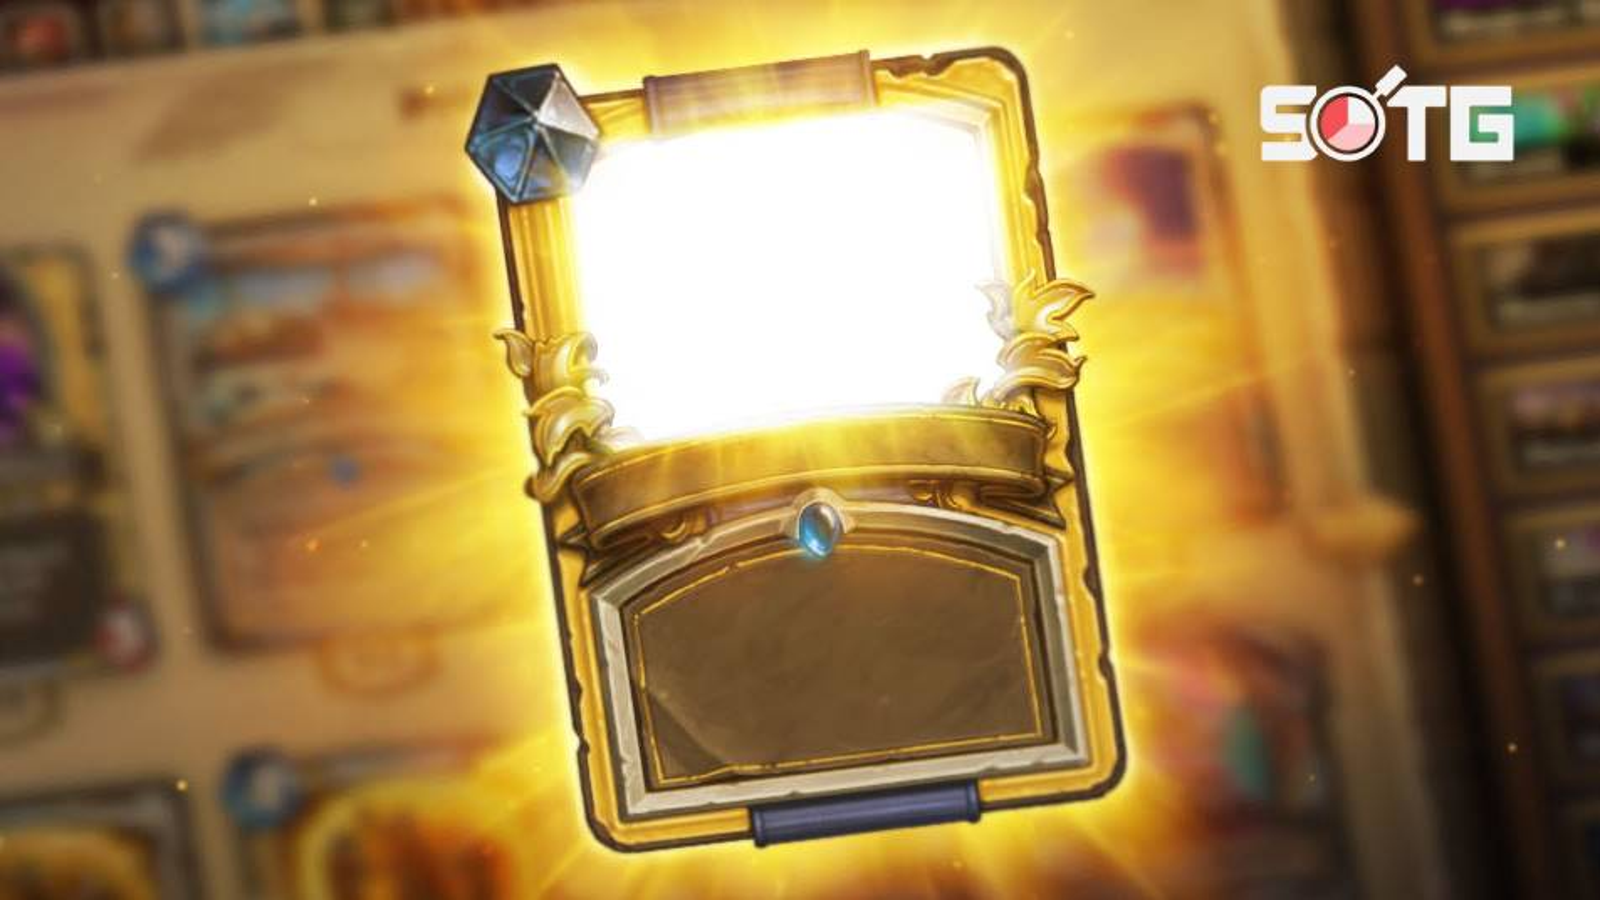 How Constant Change Will Keep Hearthstone's New Mode Fresh